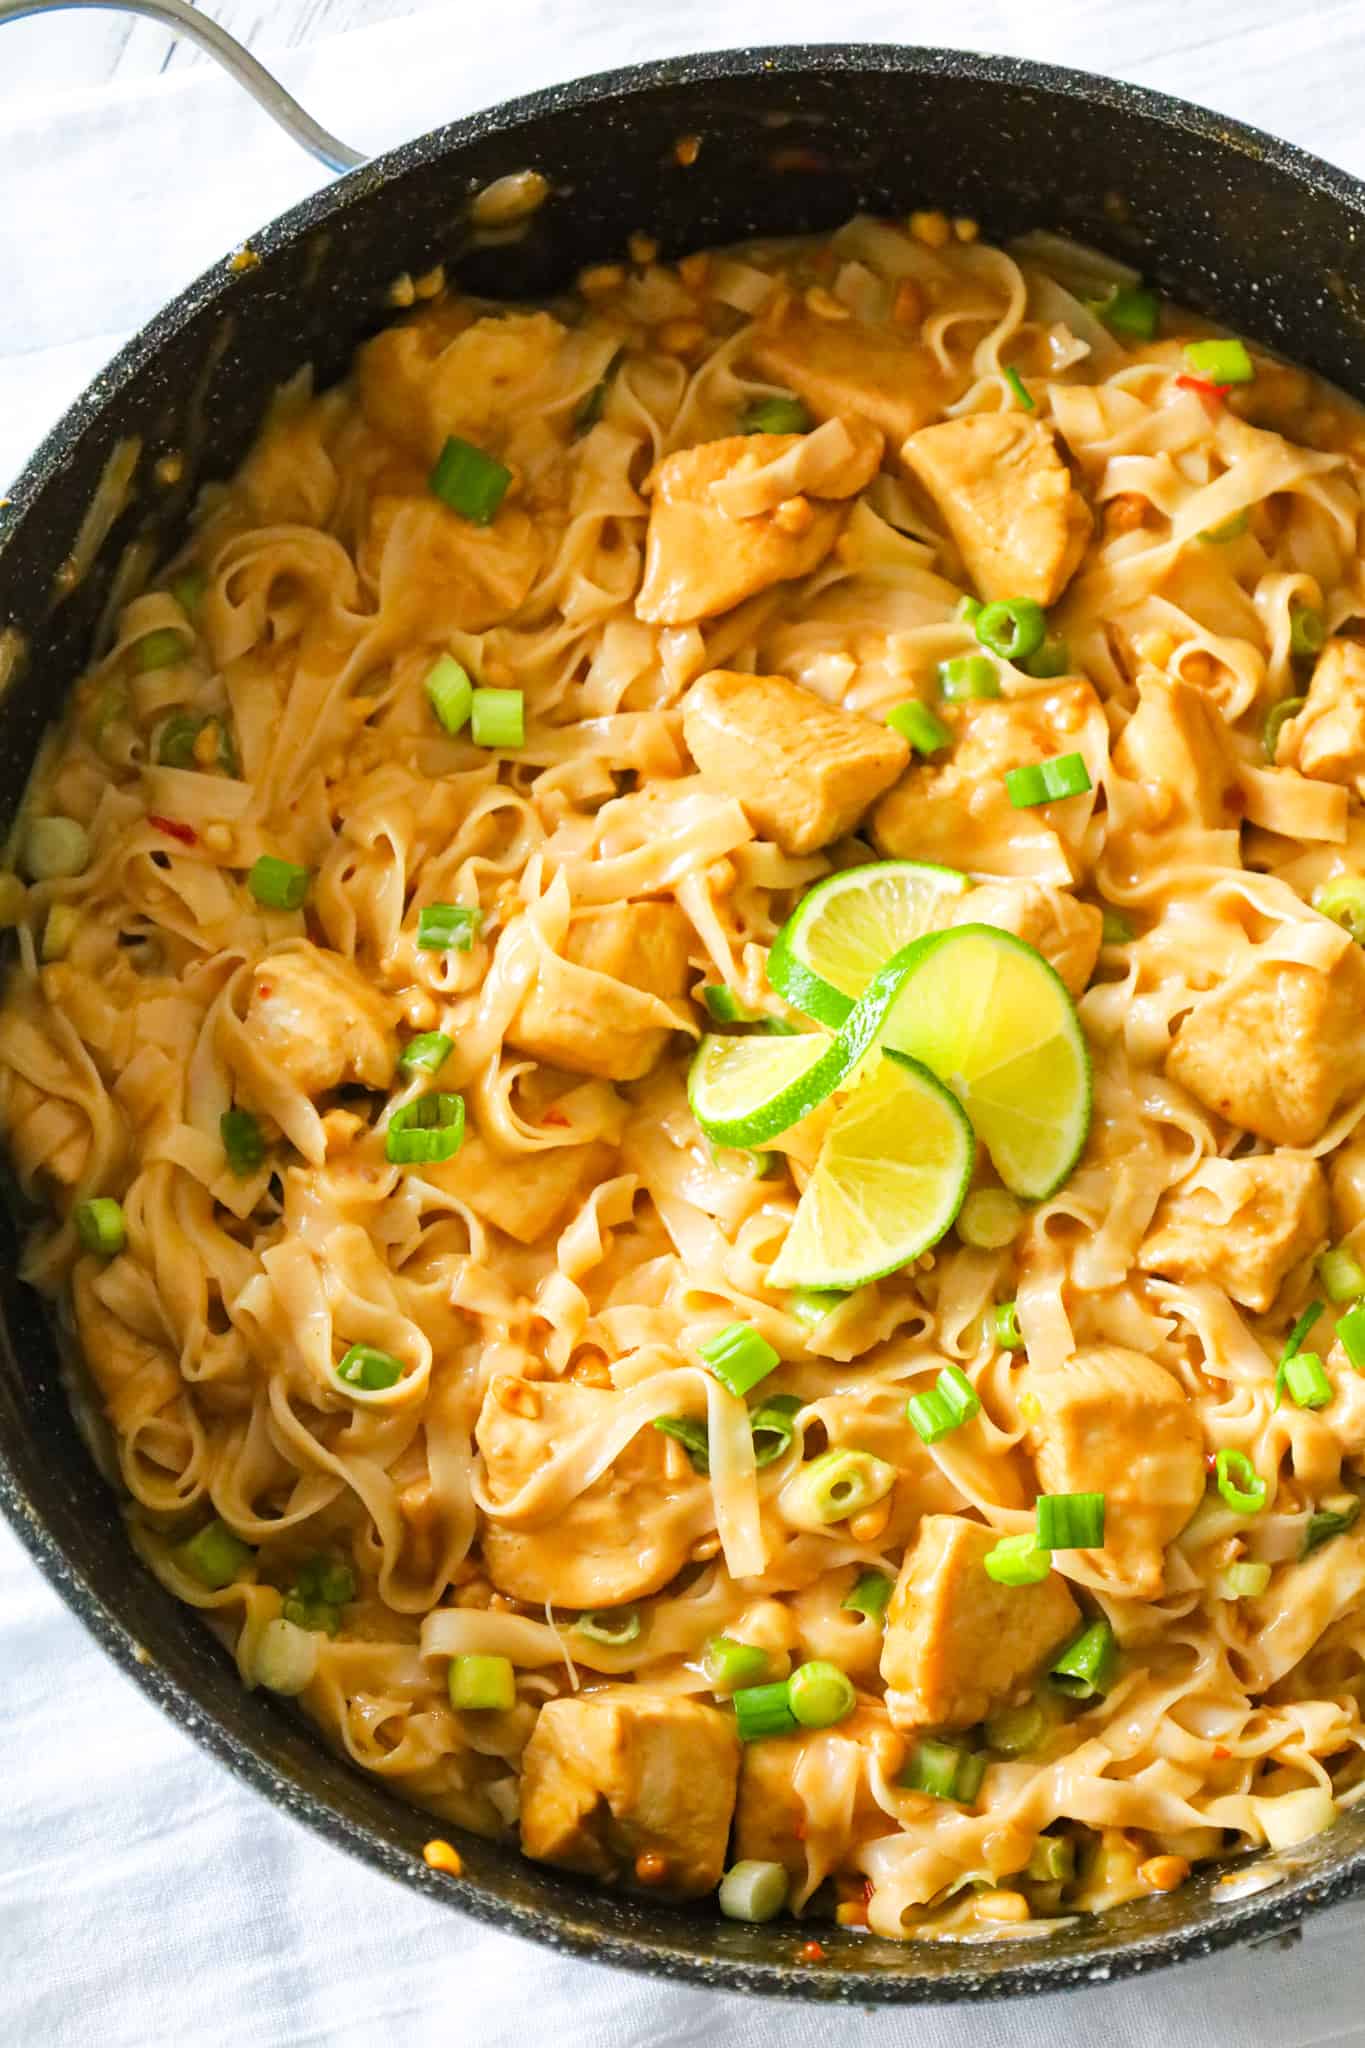 Peanut Butter Chicken is an easy dinner recipe made with boneless, skinless chicken breast chunks and rice stick noodles all tossed in sauce made from coconut milk, soy sauce, lime juice, Thai chili sauce and peanut butter.